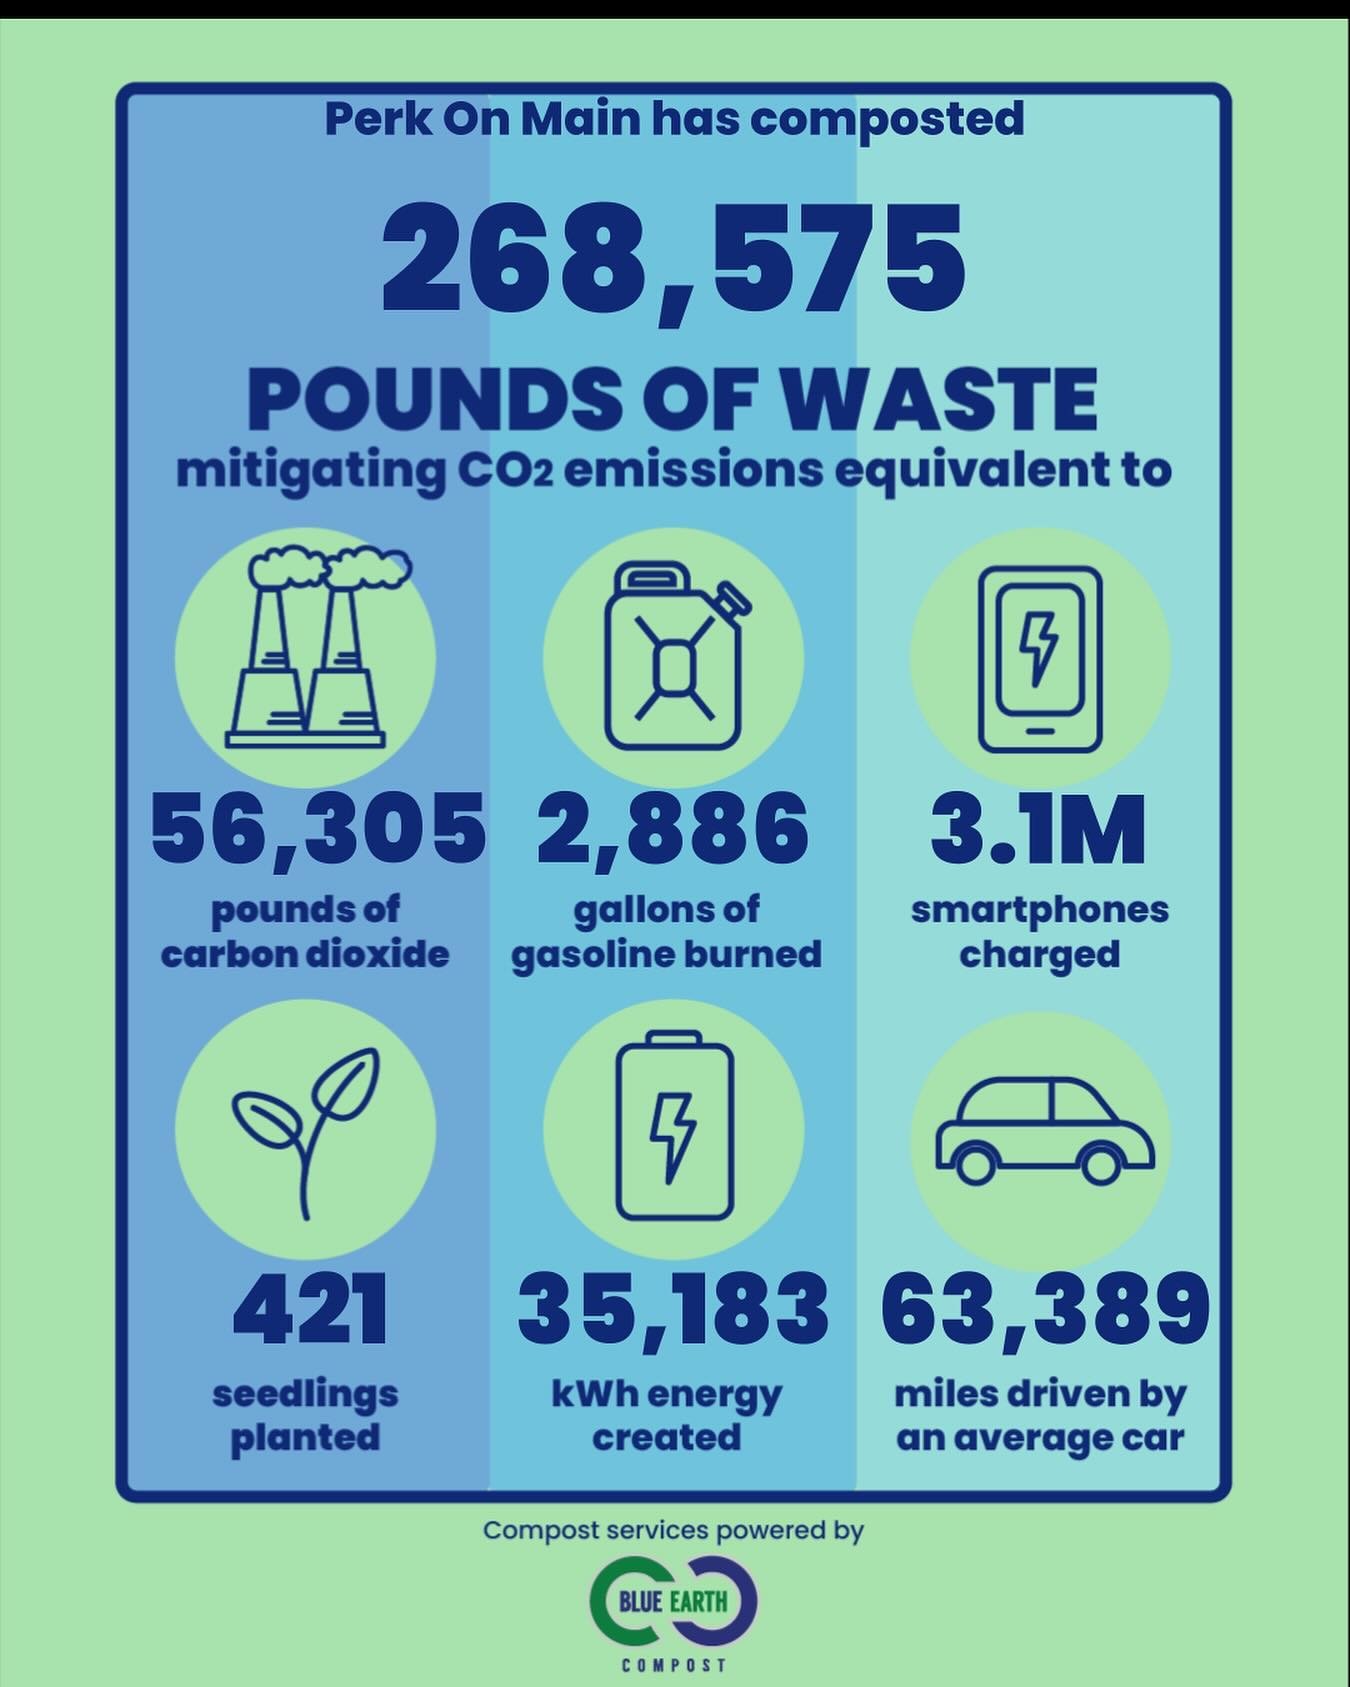 🌱 #happyearthday🌎 
The team at Perk, along with our customers, have averted over a ton of food waste from the waste stream last year! This is mostly created from scraps from fruit, vegetables and any waste we were unable to avoid. It&rsquo;s also f